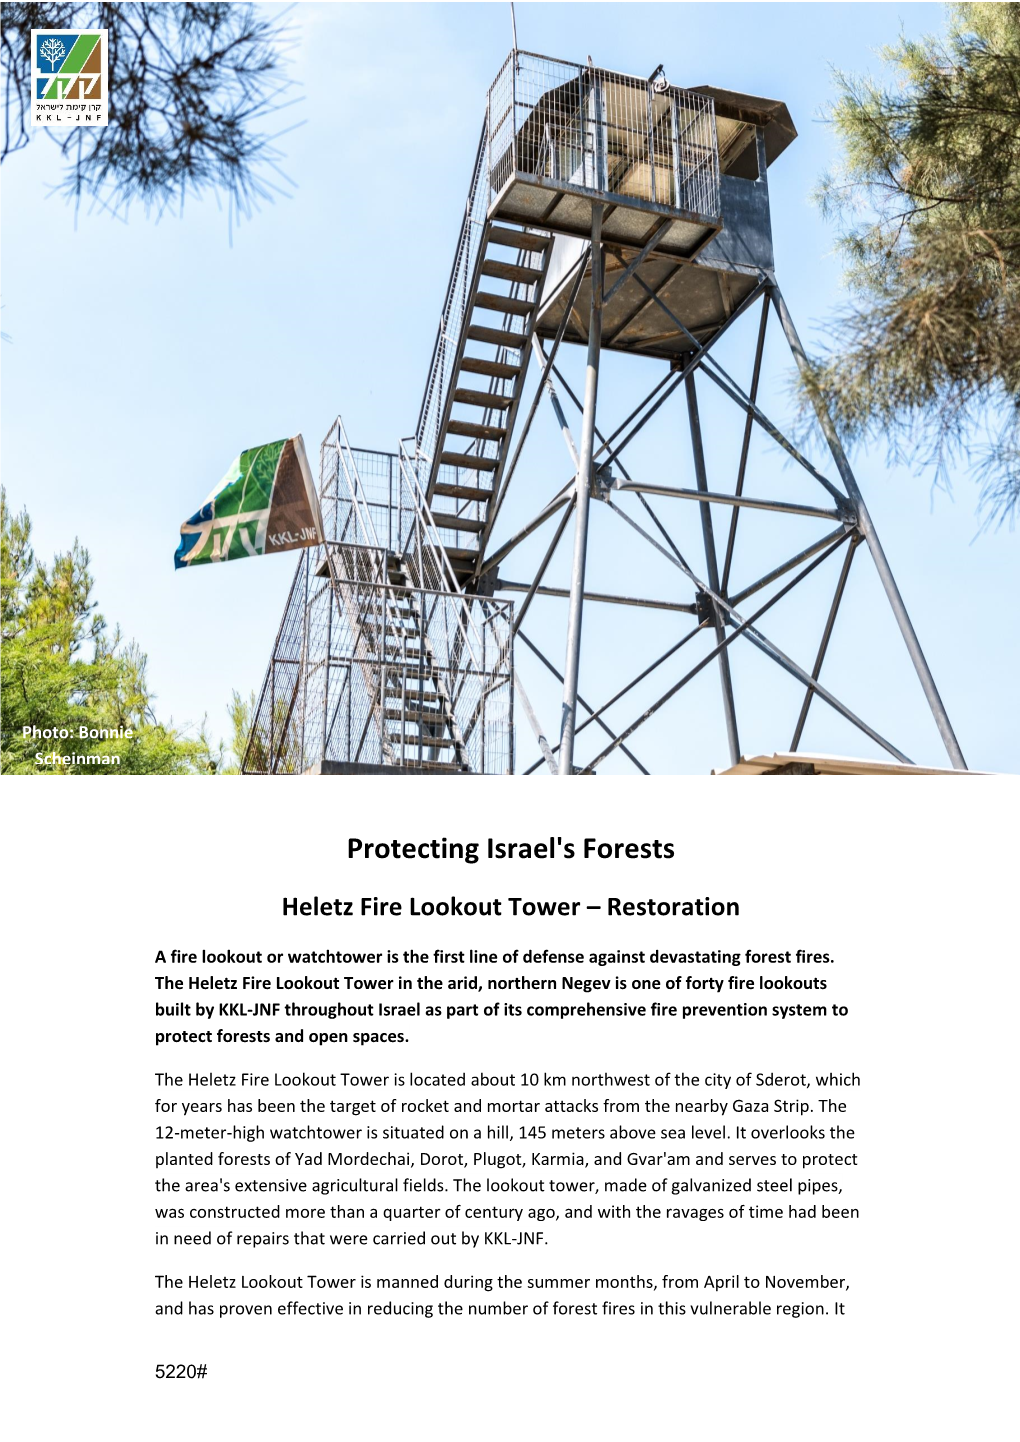 Protecting Israel's Forests Restoration – Heletz Fire Lookout Tower